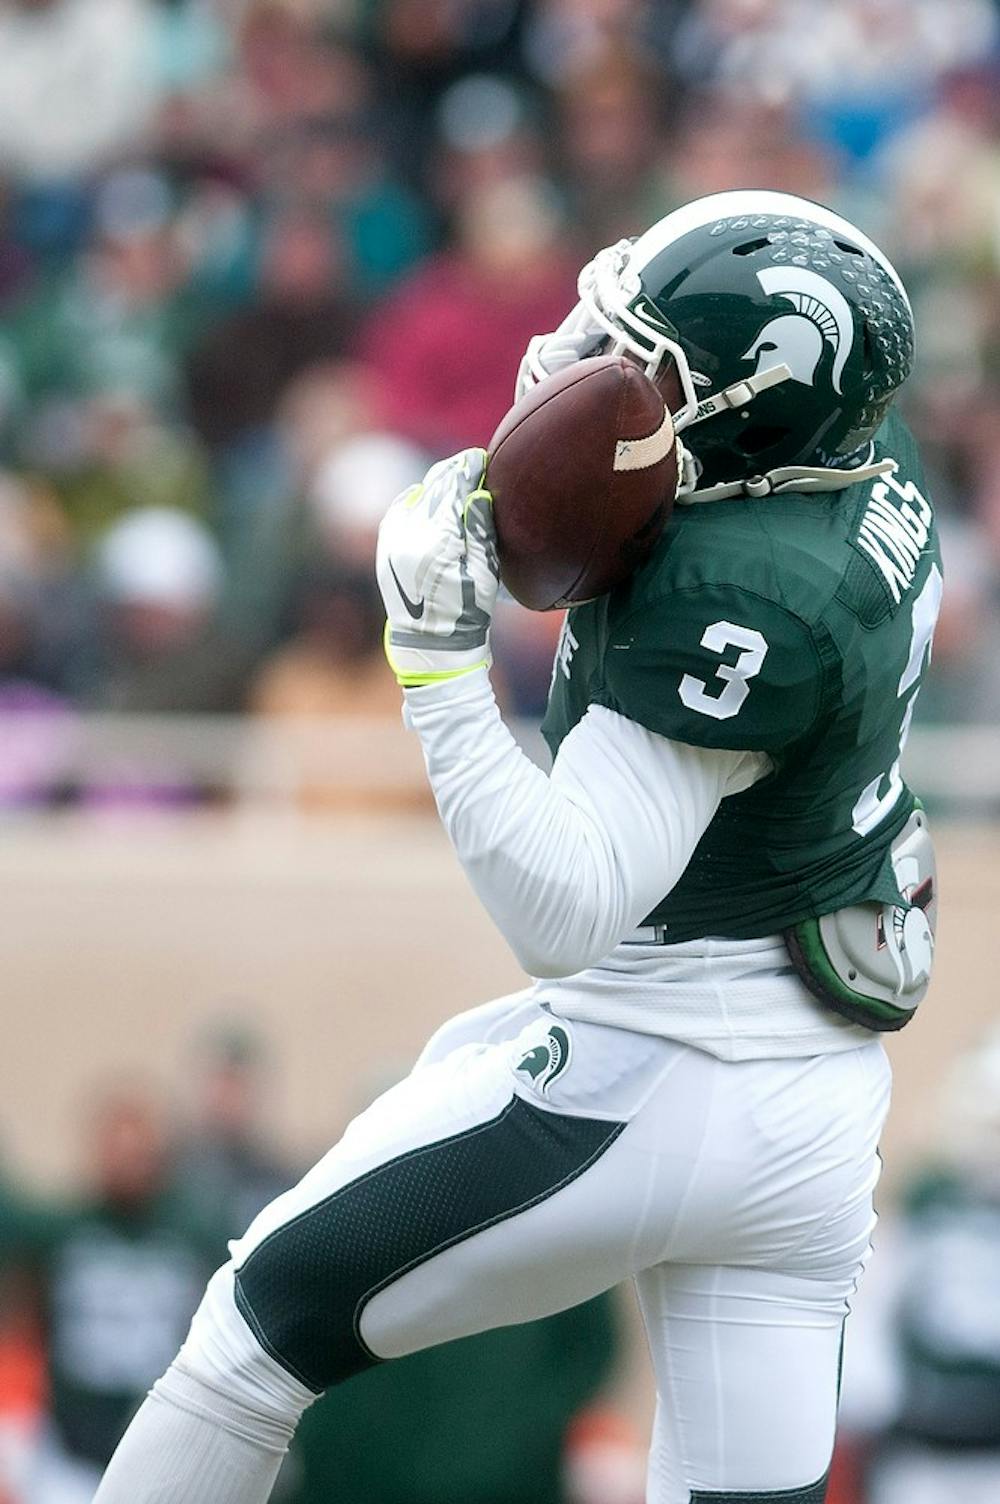 <p>Junior wide receiver Macgarrett Kings Jr. nearly fumbles the ball Nov. 22, 2014, during the game against Rutgers at Spartan Stadium. The Spartans defeated the Scarlet Knights, 45-3. Jessalyn Tamez/The State News </p>